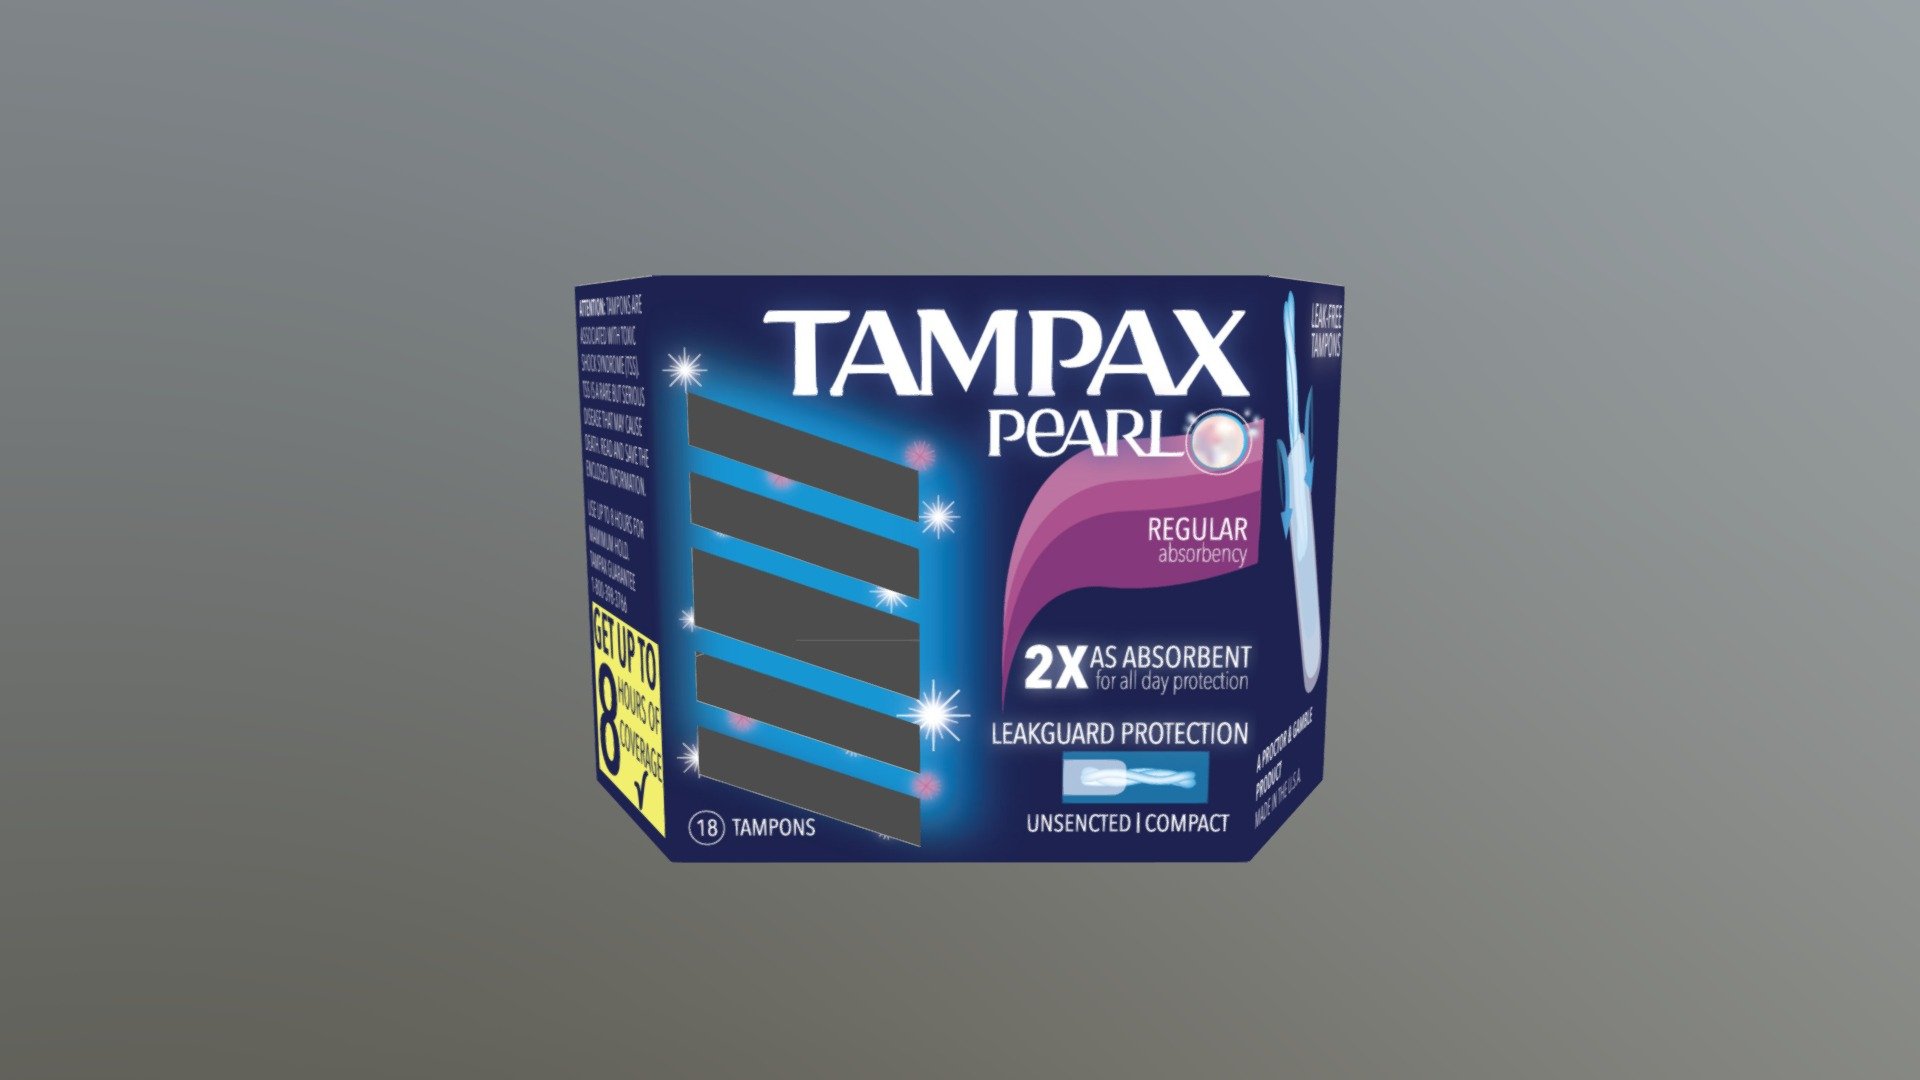 This is a refresh for the brand Tampax. This was created with a unique die cut and shape. This was crafted in Illustrator with the ESKO plug-in - Die Cut Box - 3D model by zombiiesnare 3d model